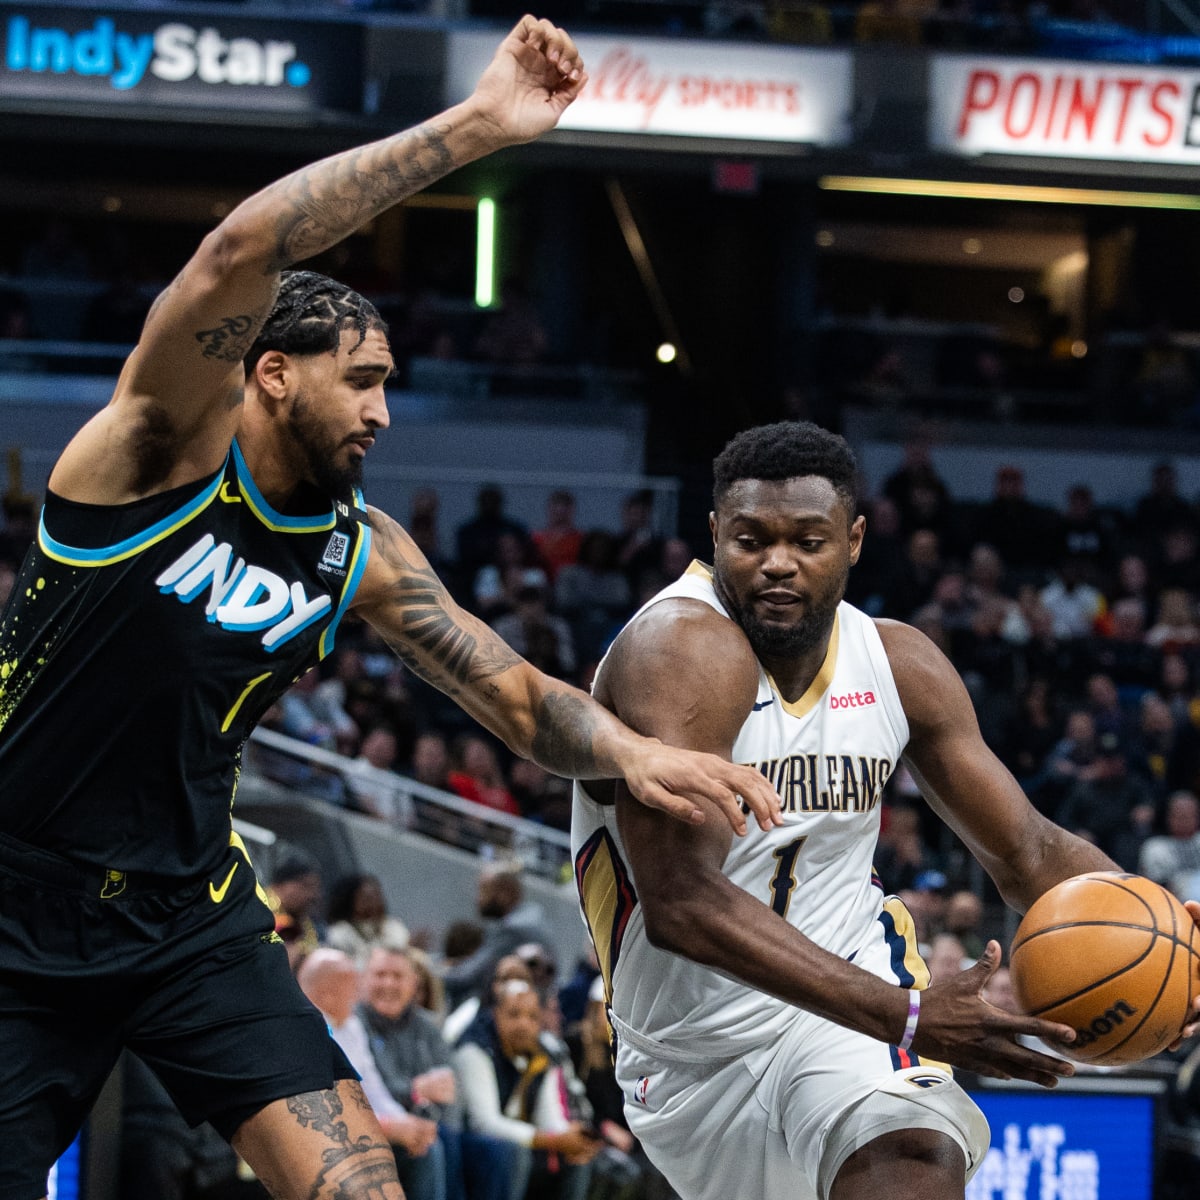 Pacers prevail over Pelicans to open home-and-home set - Indianapolis News, Indiana Weather, Indiana Traffic, WISH-TV